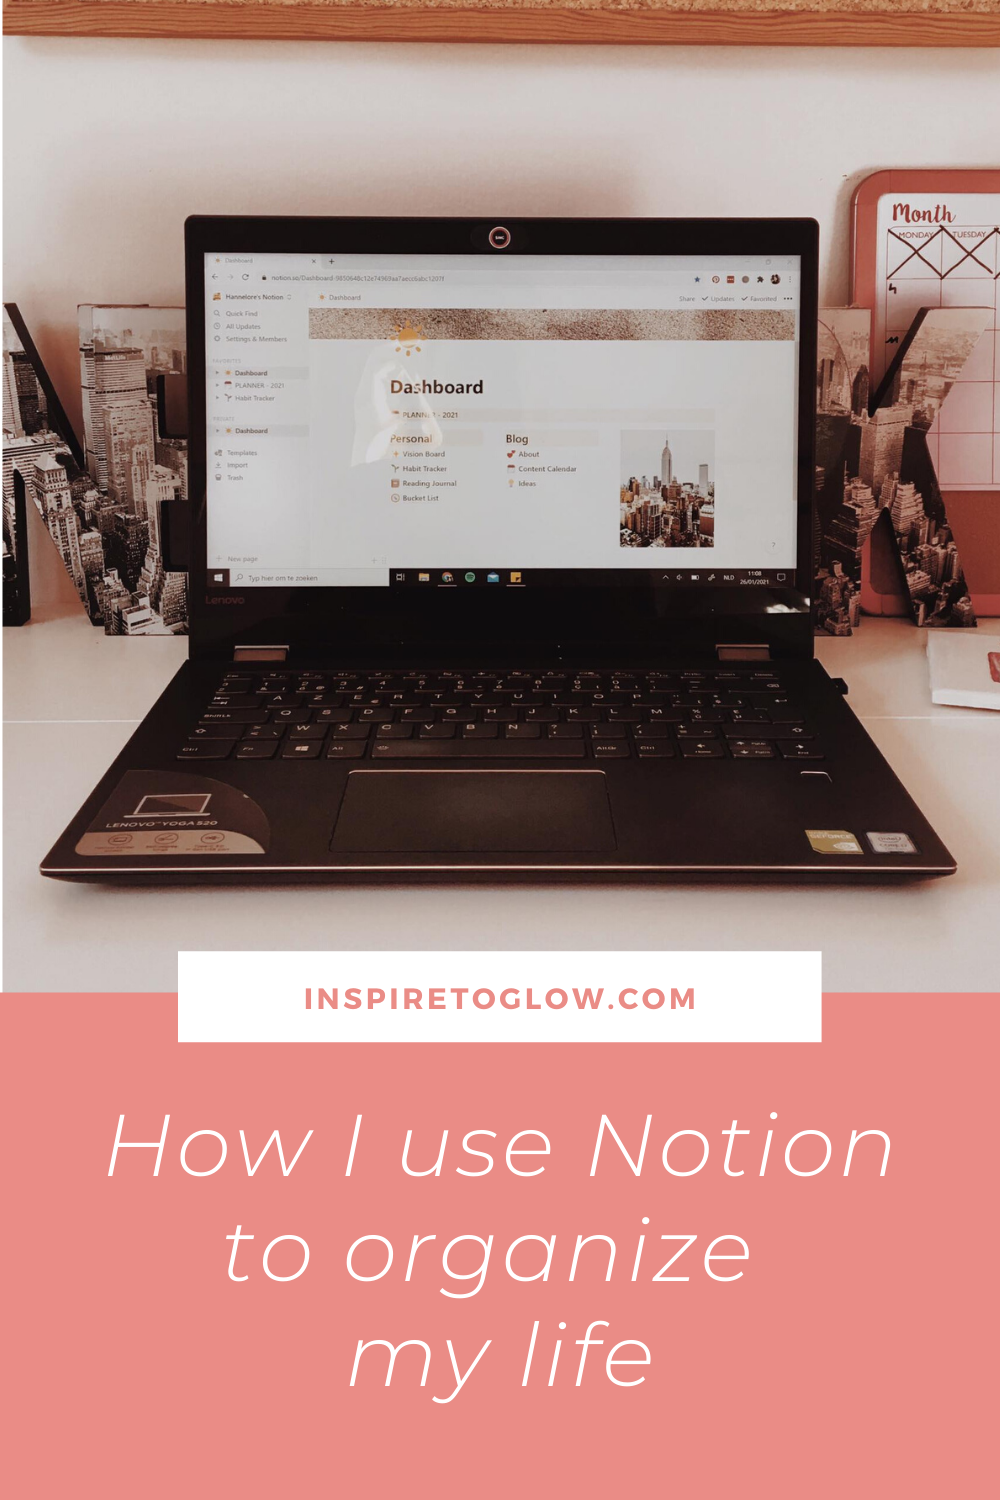 How I use Notion to organize my life - Productivity Tool - Inspire to Glow - Pinterest